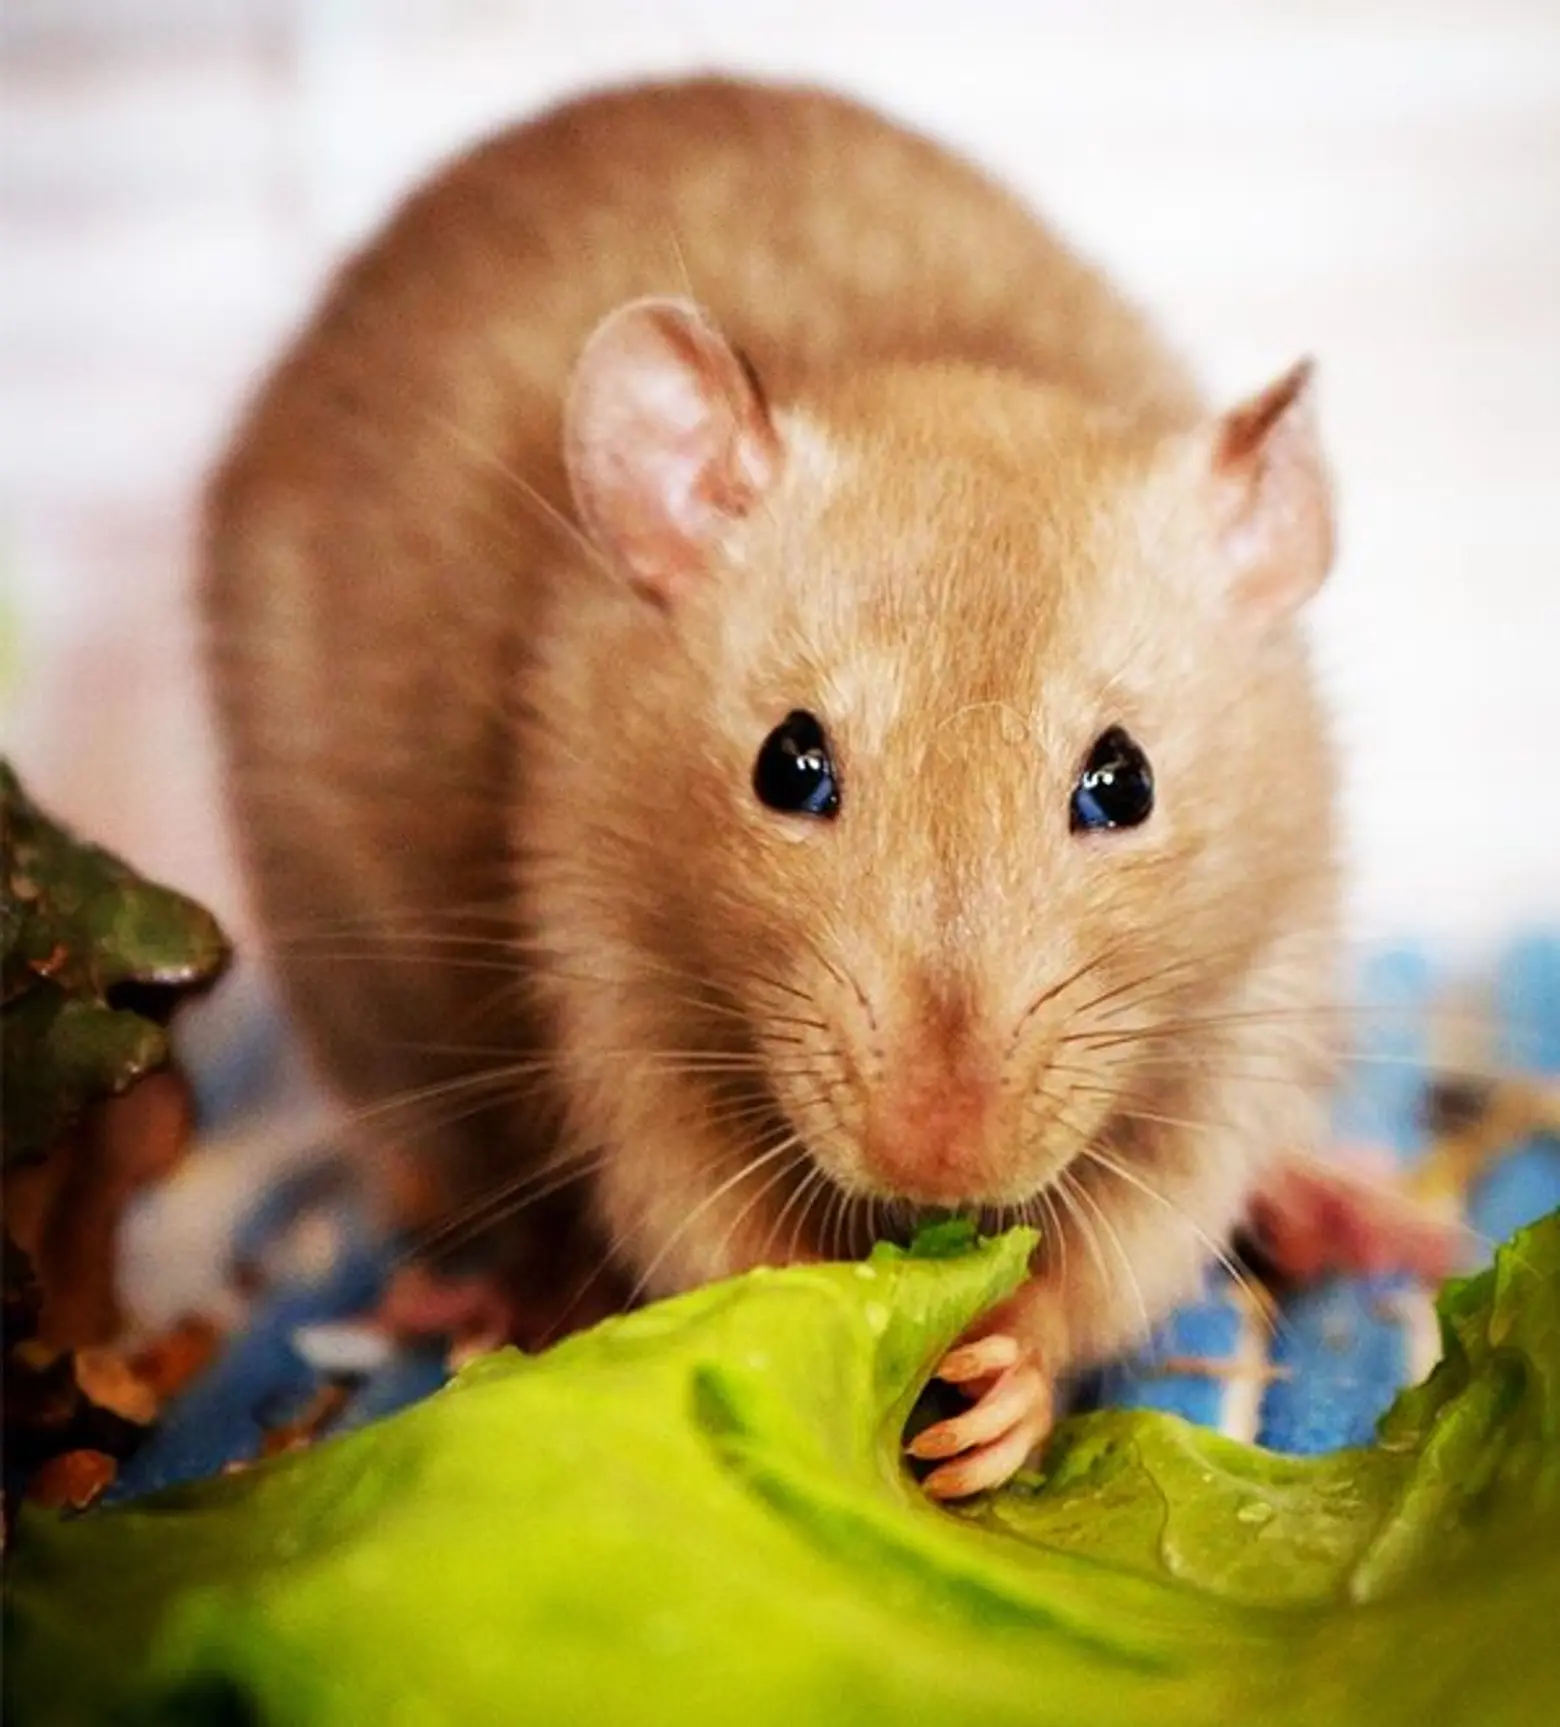 Rat complaints are up at NYC restaurants, says new report